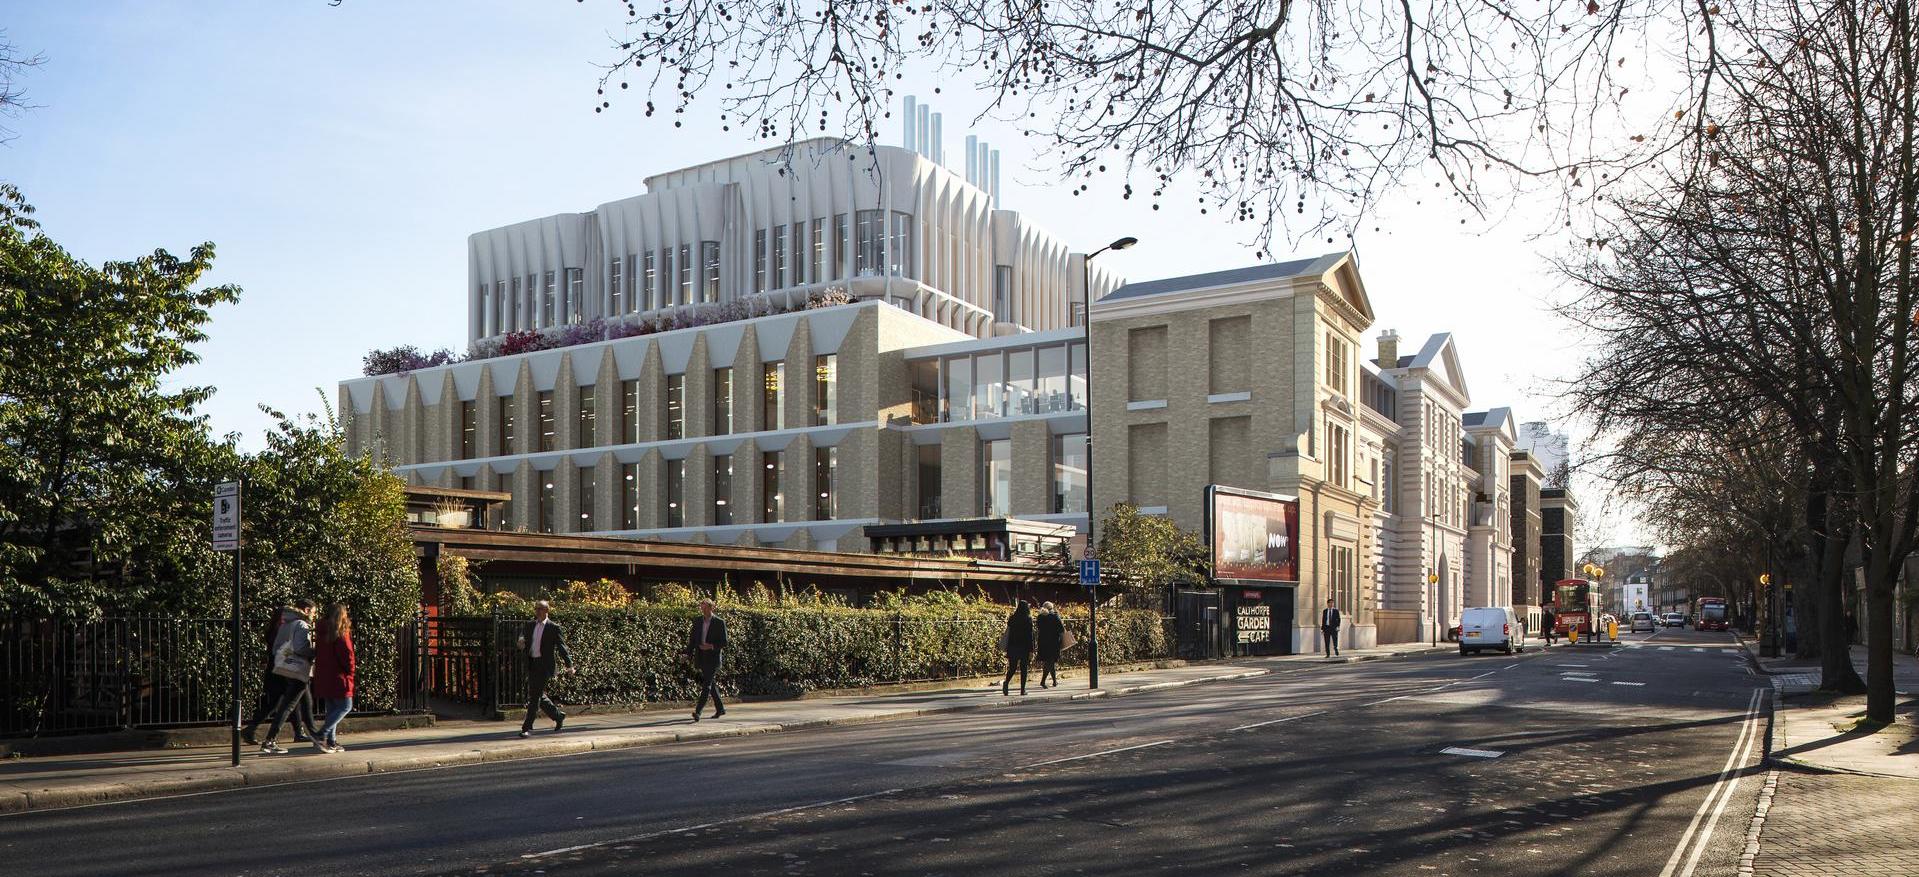 Architect's depiction of UCL Neuroscience building at Gray's Inn Road, London, constructed by ISG ltd